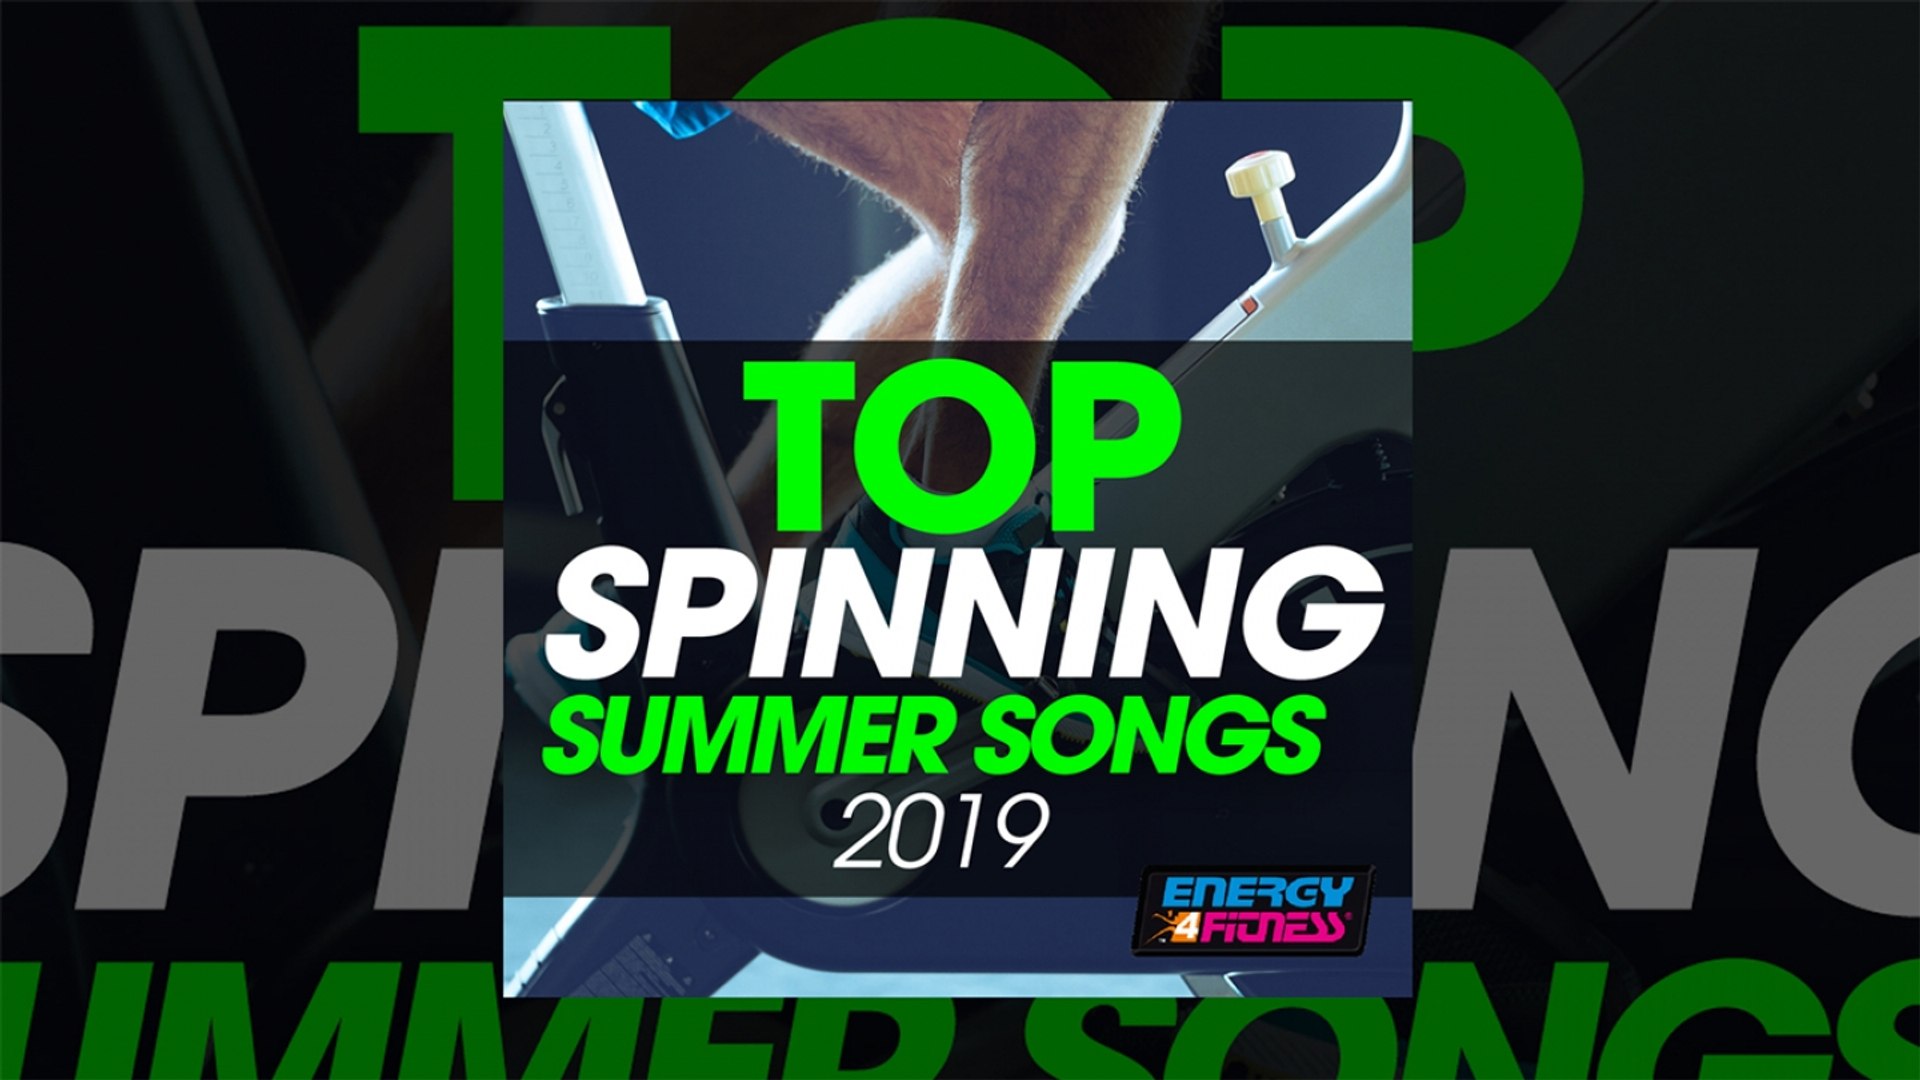 E4F - Top Spinning Summer Songs 2019 - Fitness & Music 2019